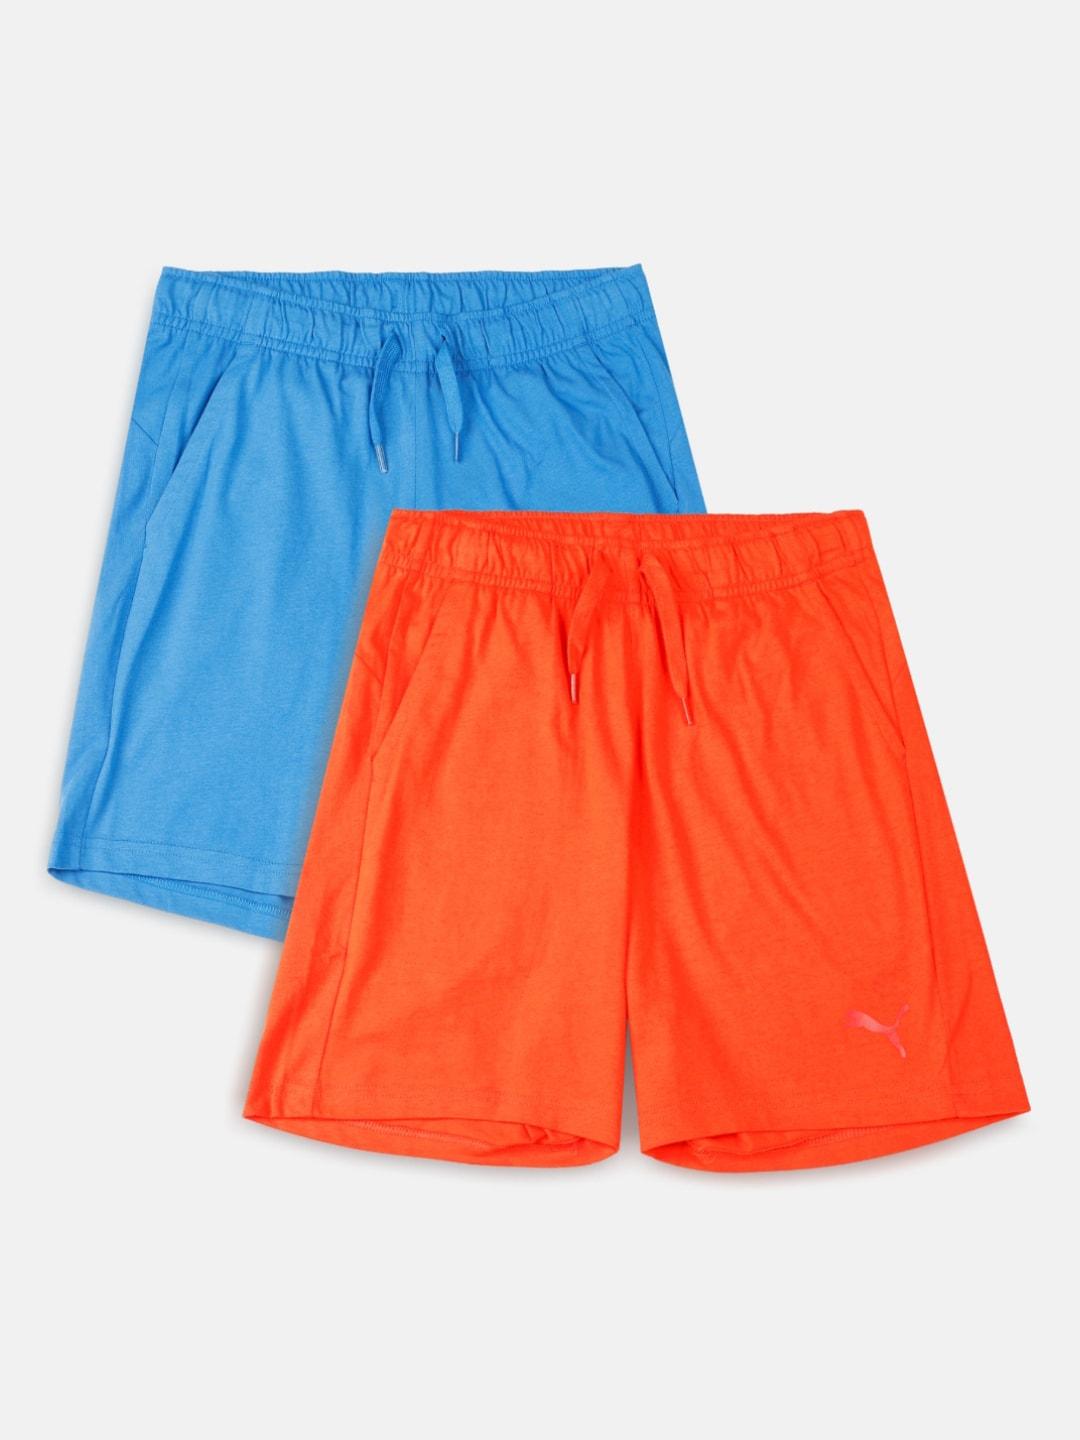 Puma Boys Pack of 2 Red & Blue Outdoor Drawstrings Sports Shorts